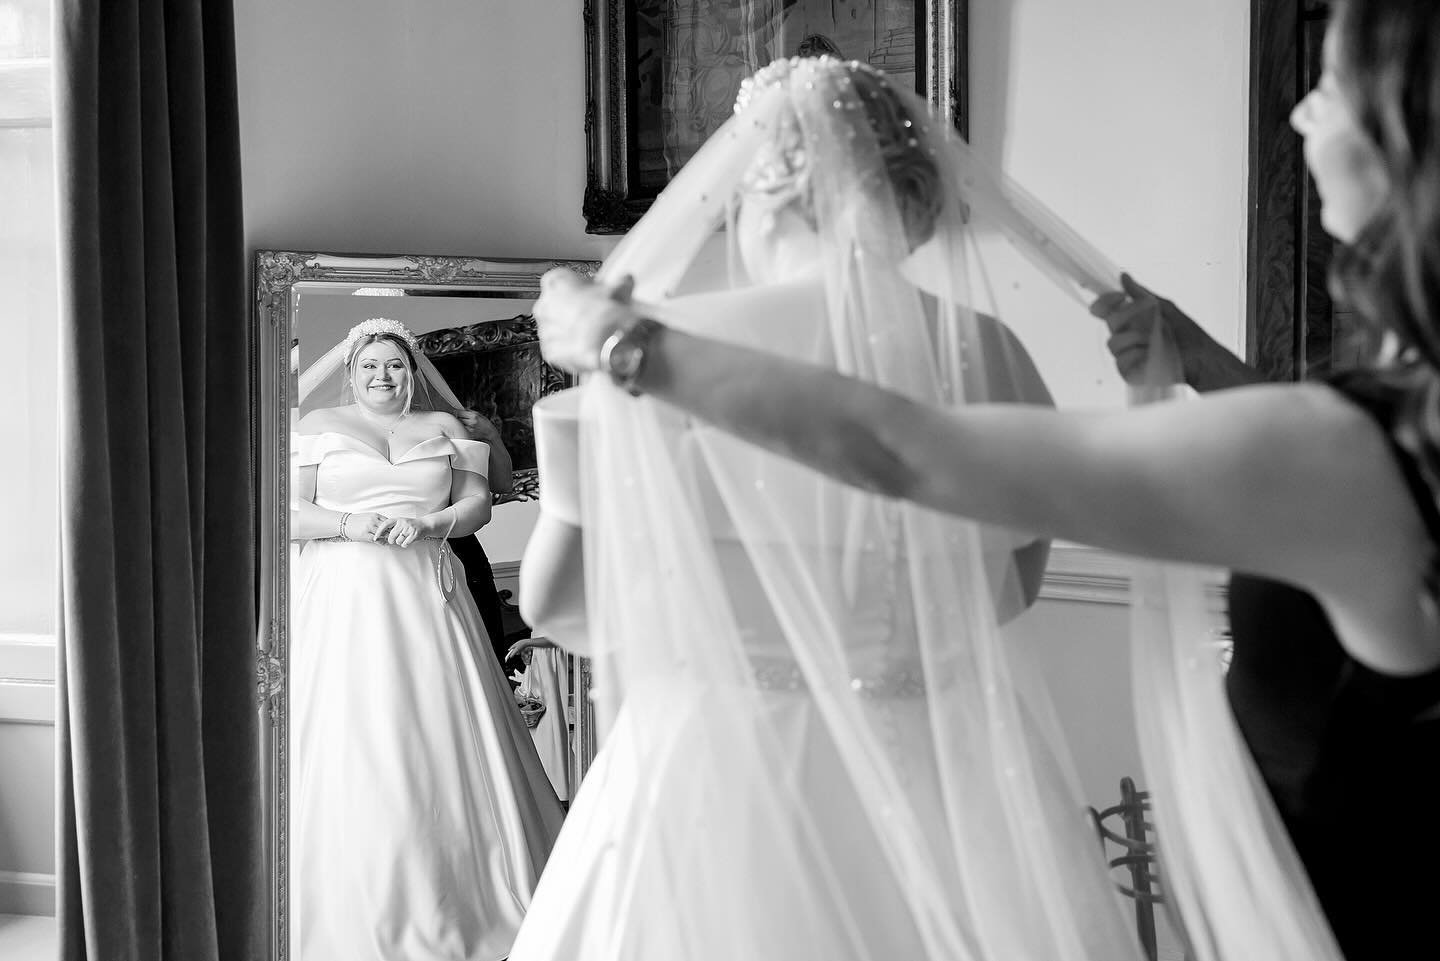 ✨ Sneak Peek of a Sneak Peek! ✨

Kat &amp; Nick&rsquo;s wedding has been on my screen today as I prepare their sneak peek, and I couldn&rsquo;t resist sharing this stunning moment of Kat having her veil put on by the wonderful @hairbykatiecrabb 😍 I 